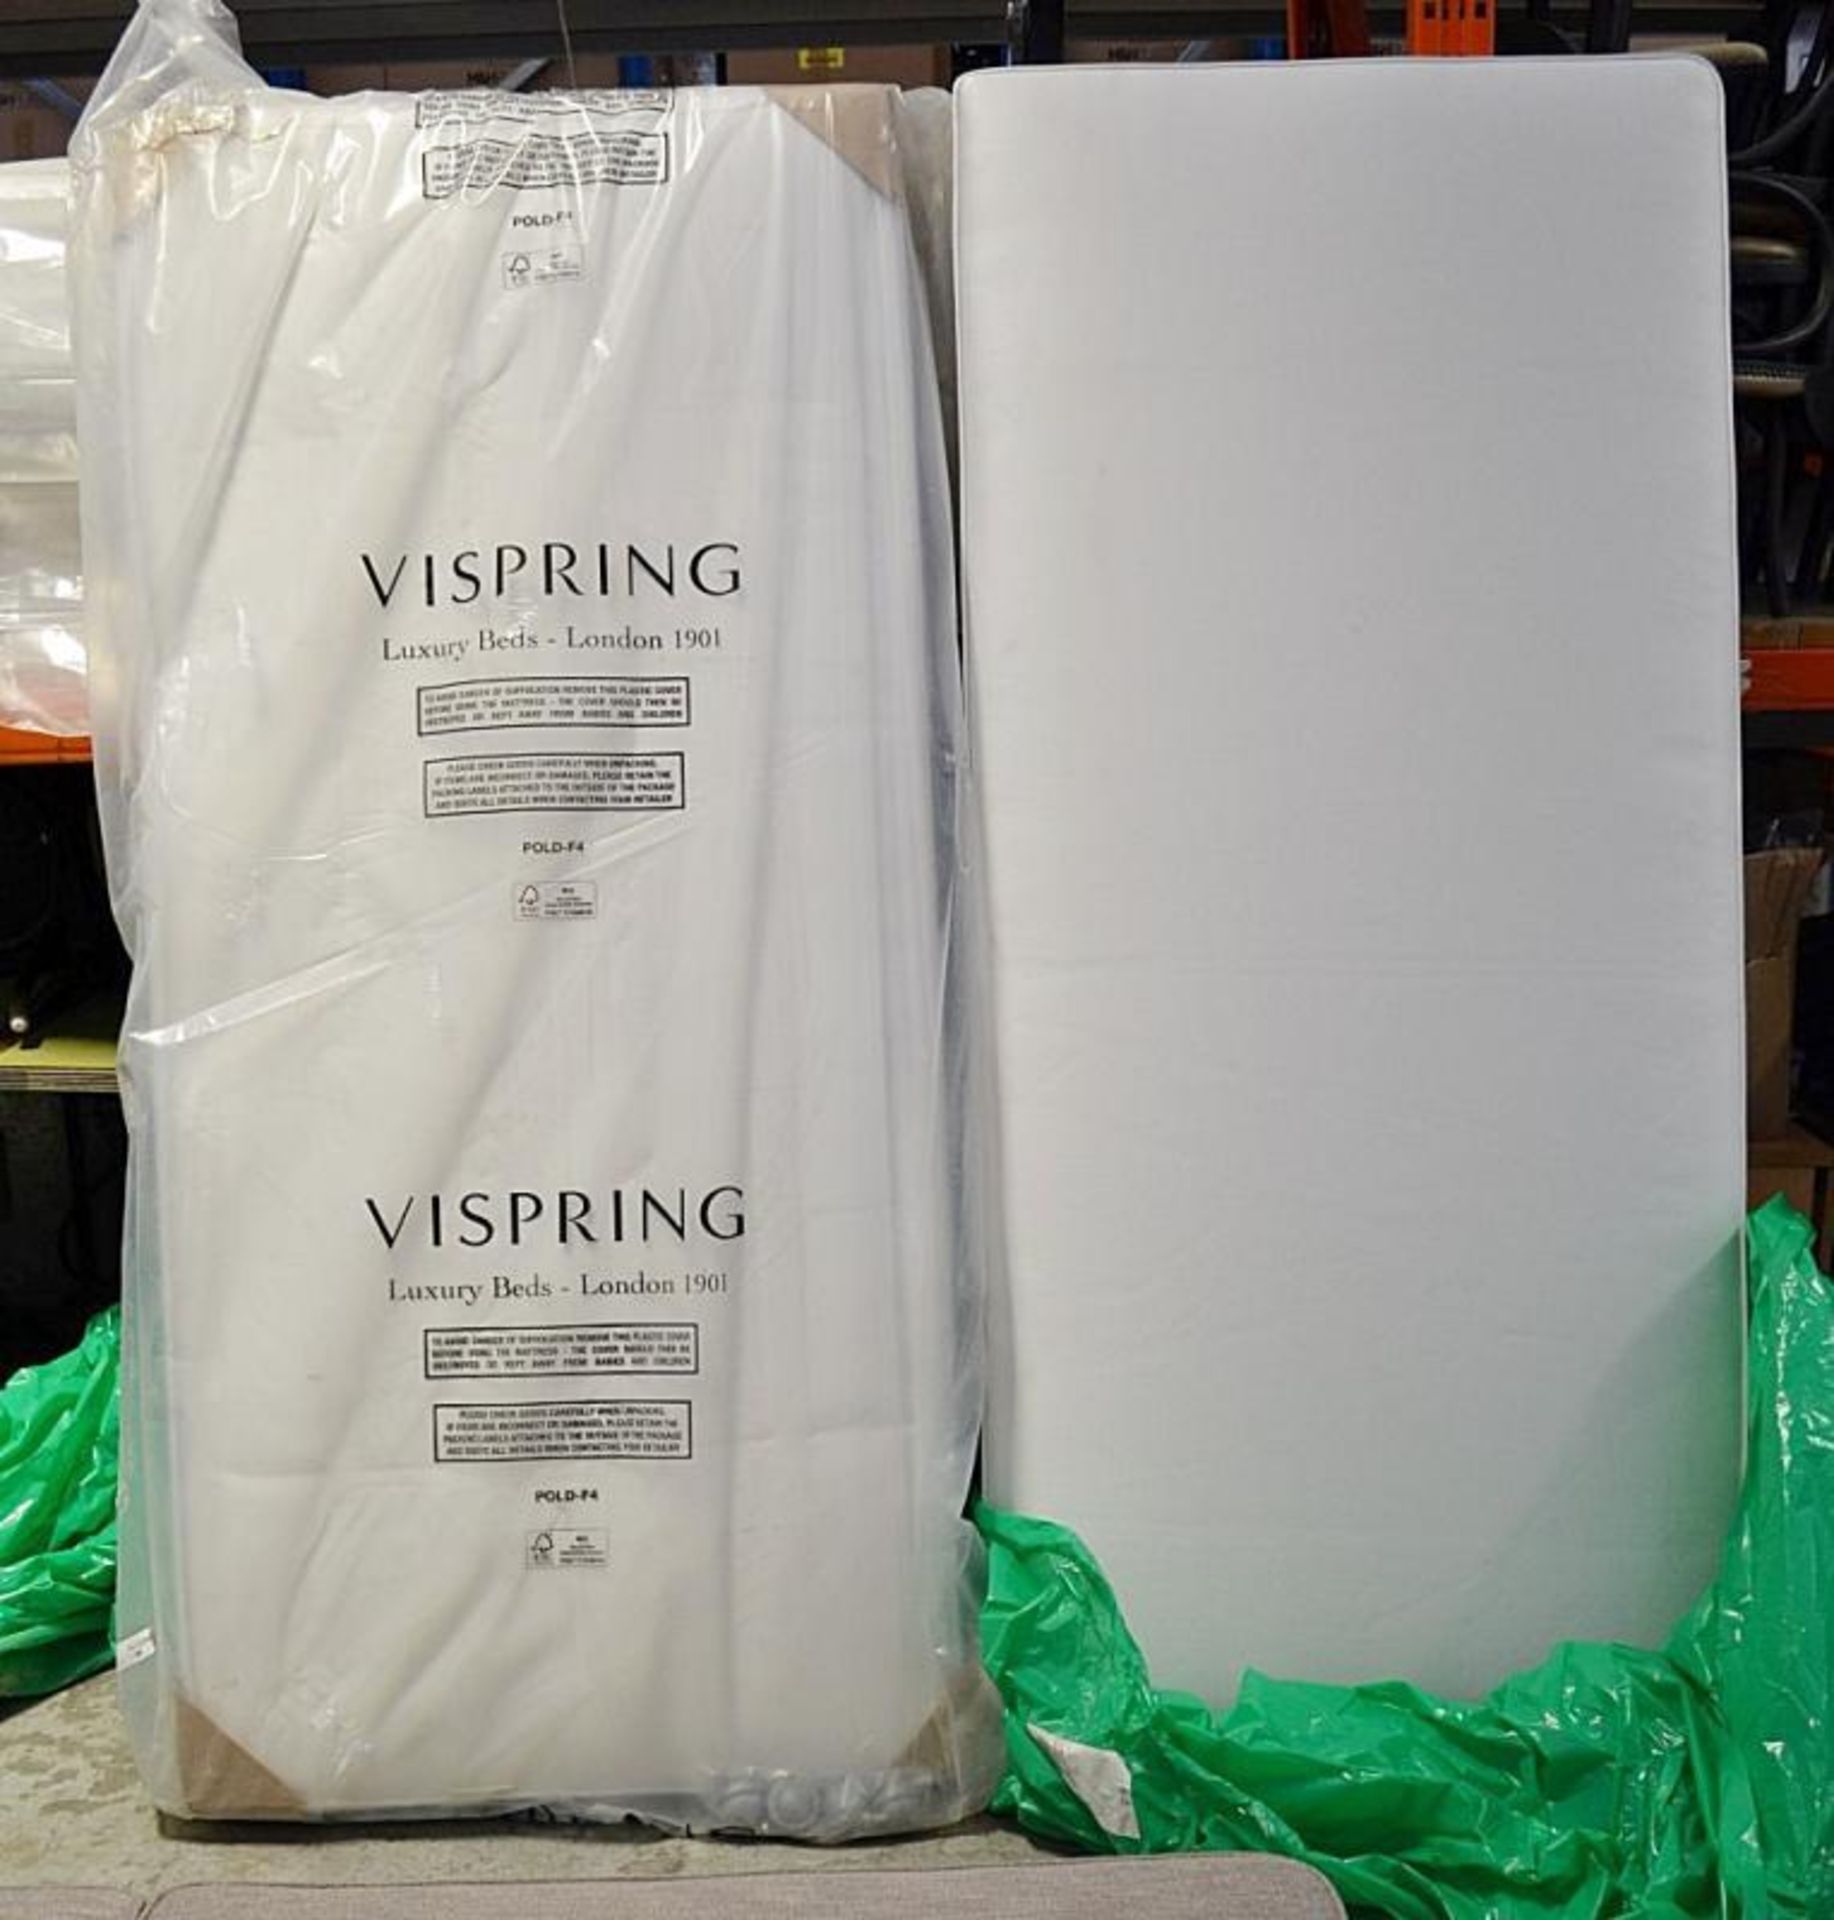 1 x VISPRING DeLuxe Divan Bed Base In White Silk-style Fabric - D182 x 200cm - Handmade In Plymouth, - Image 2 of 3